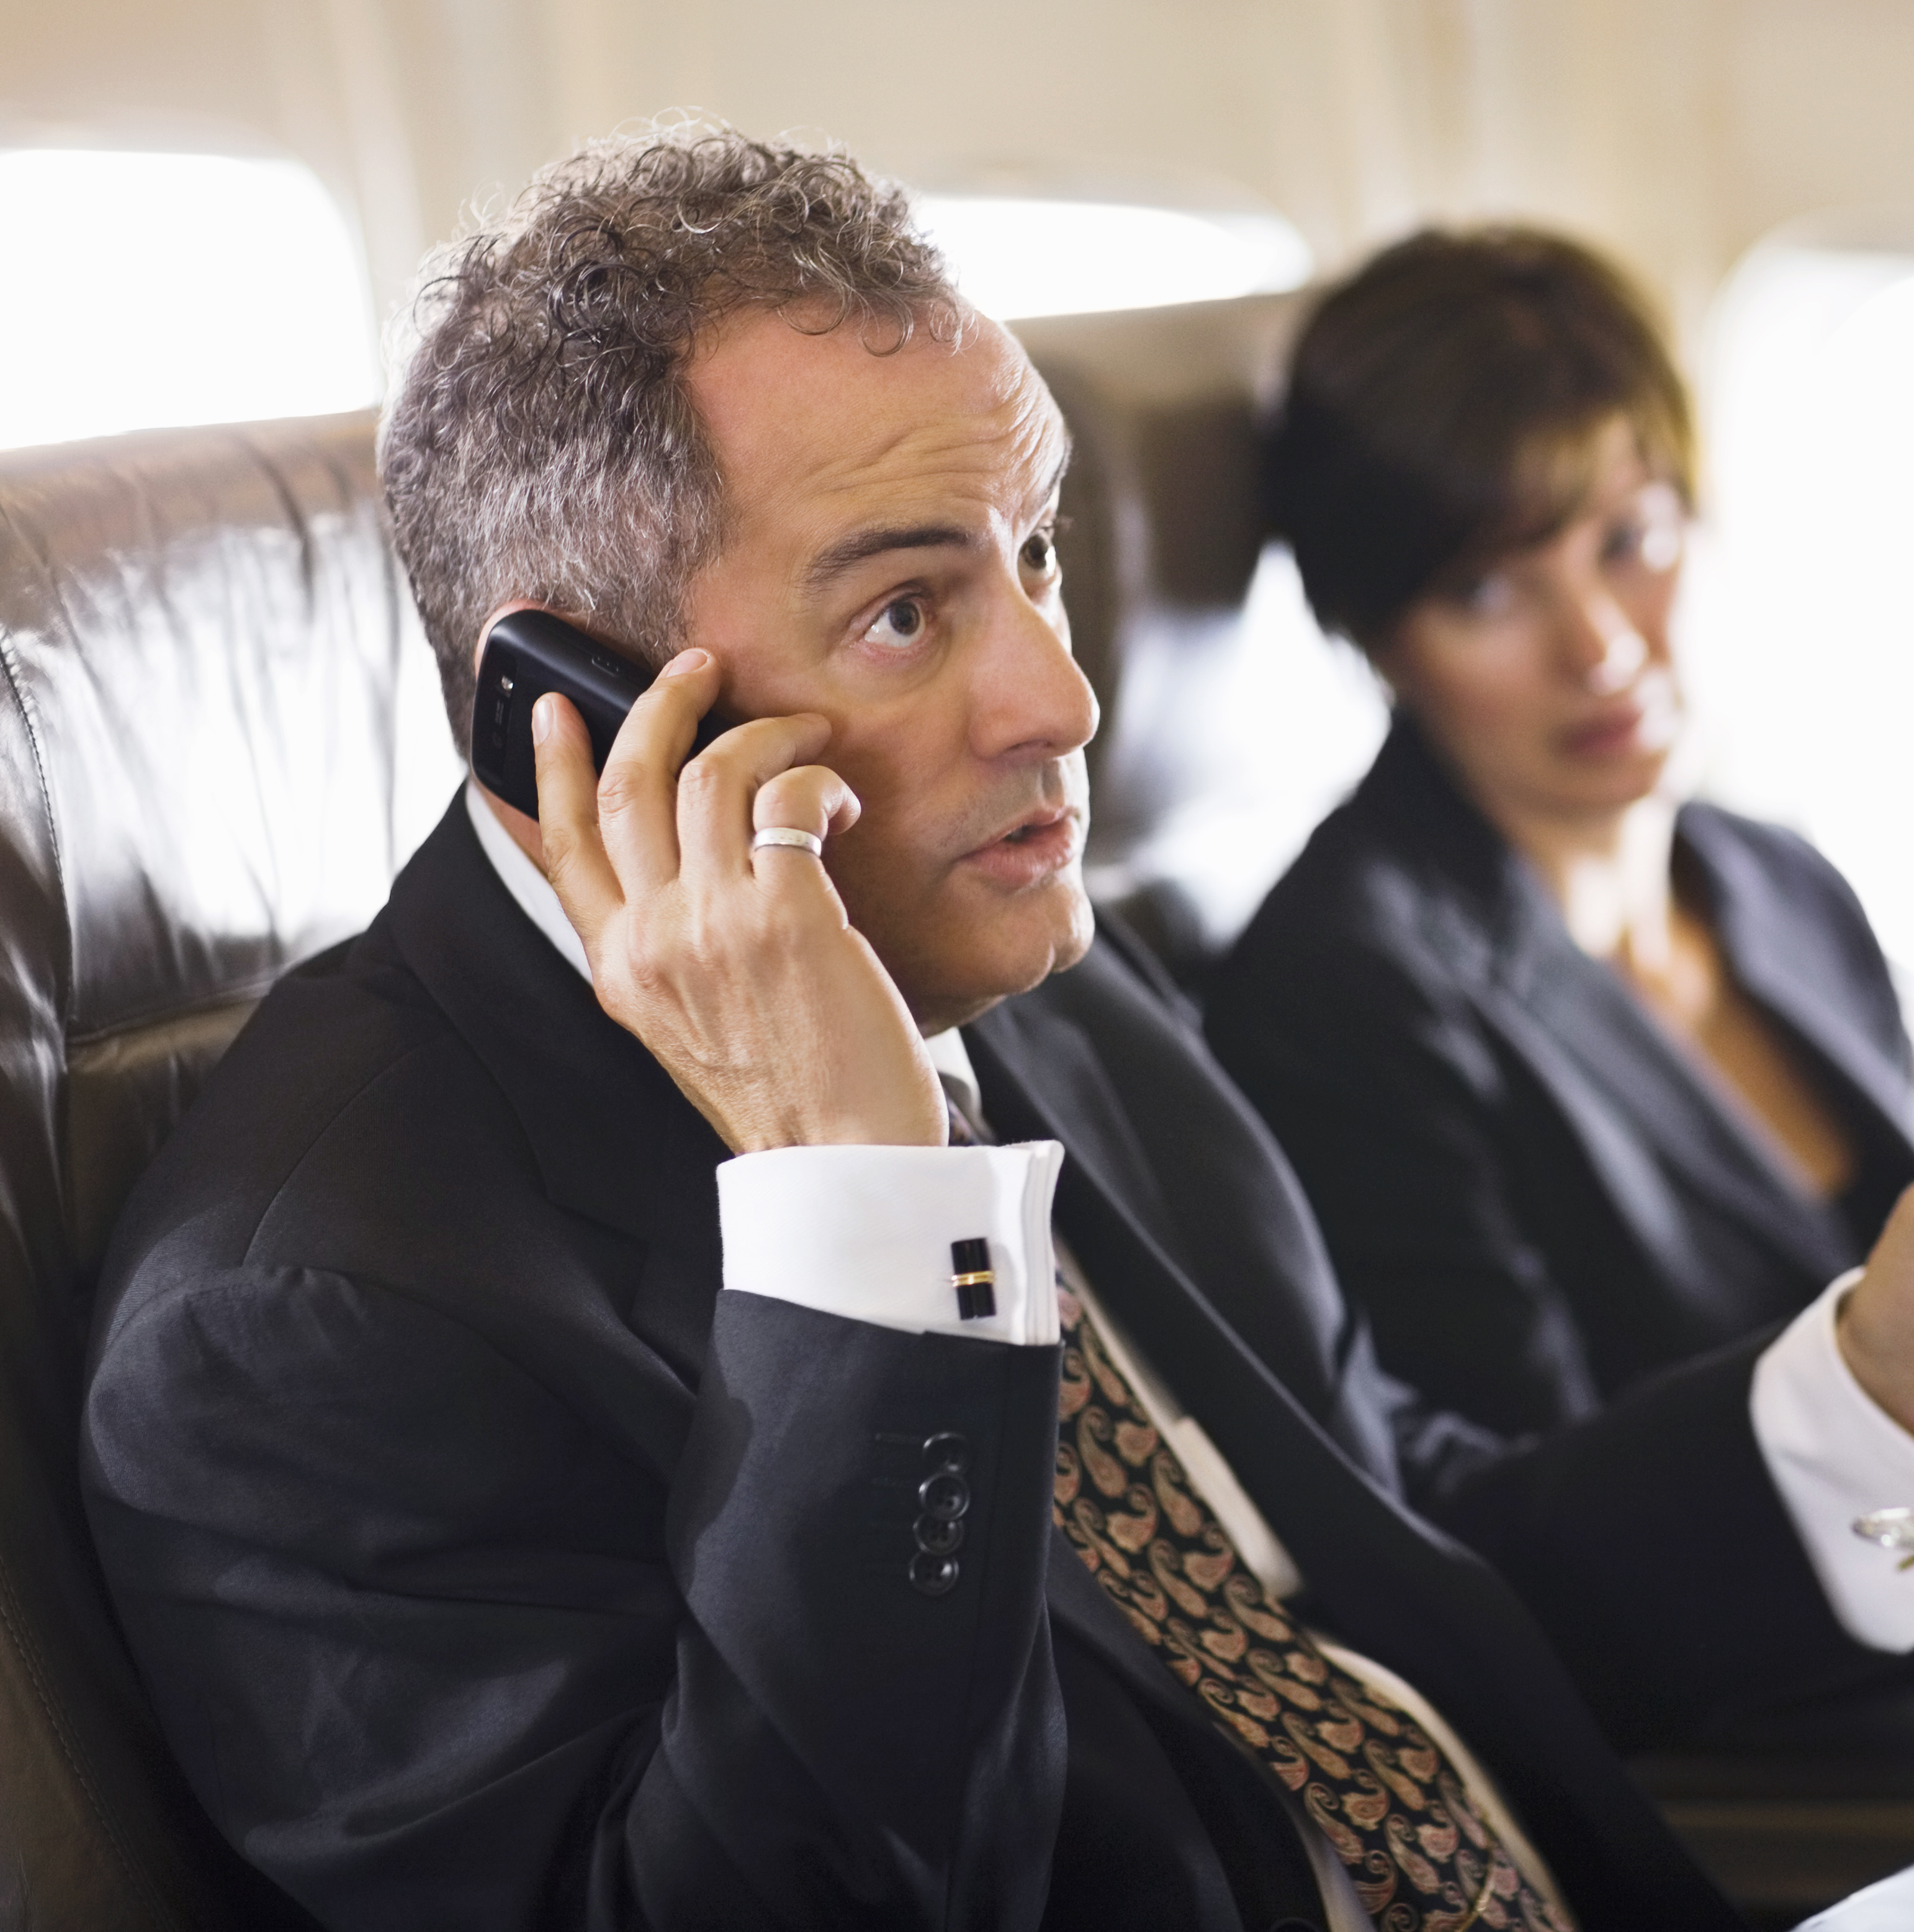 POLL: Are You Ready for Cellphone Calls on Airplanes?